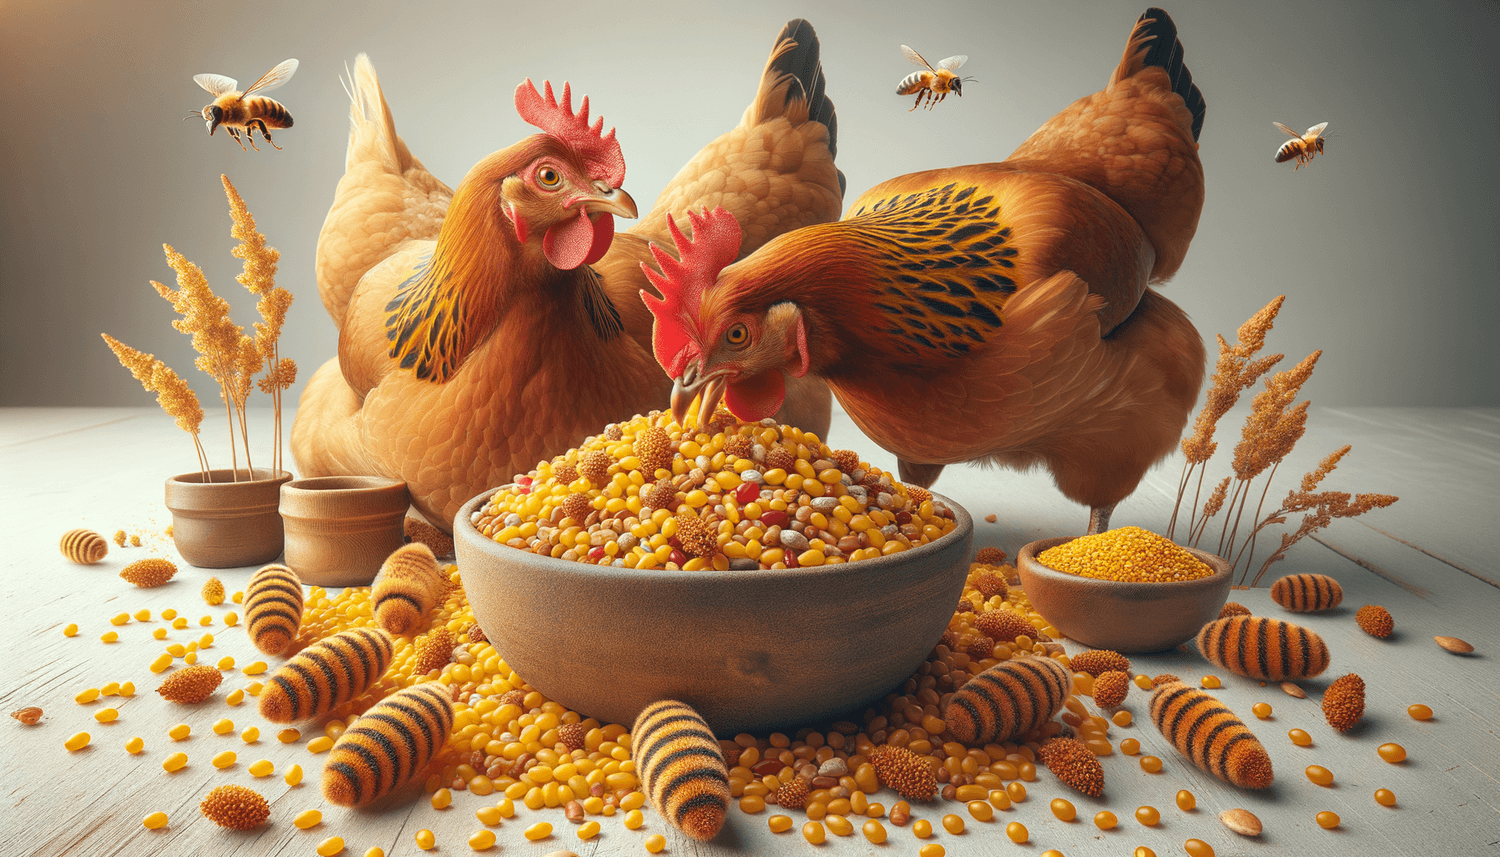 Can Chickens Eat Bee Pollen?